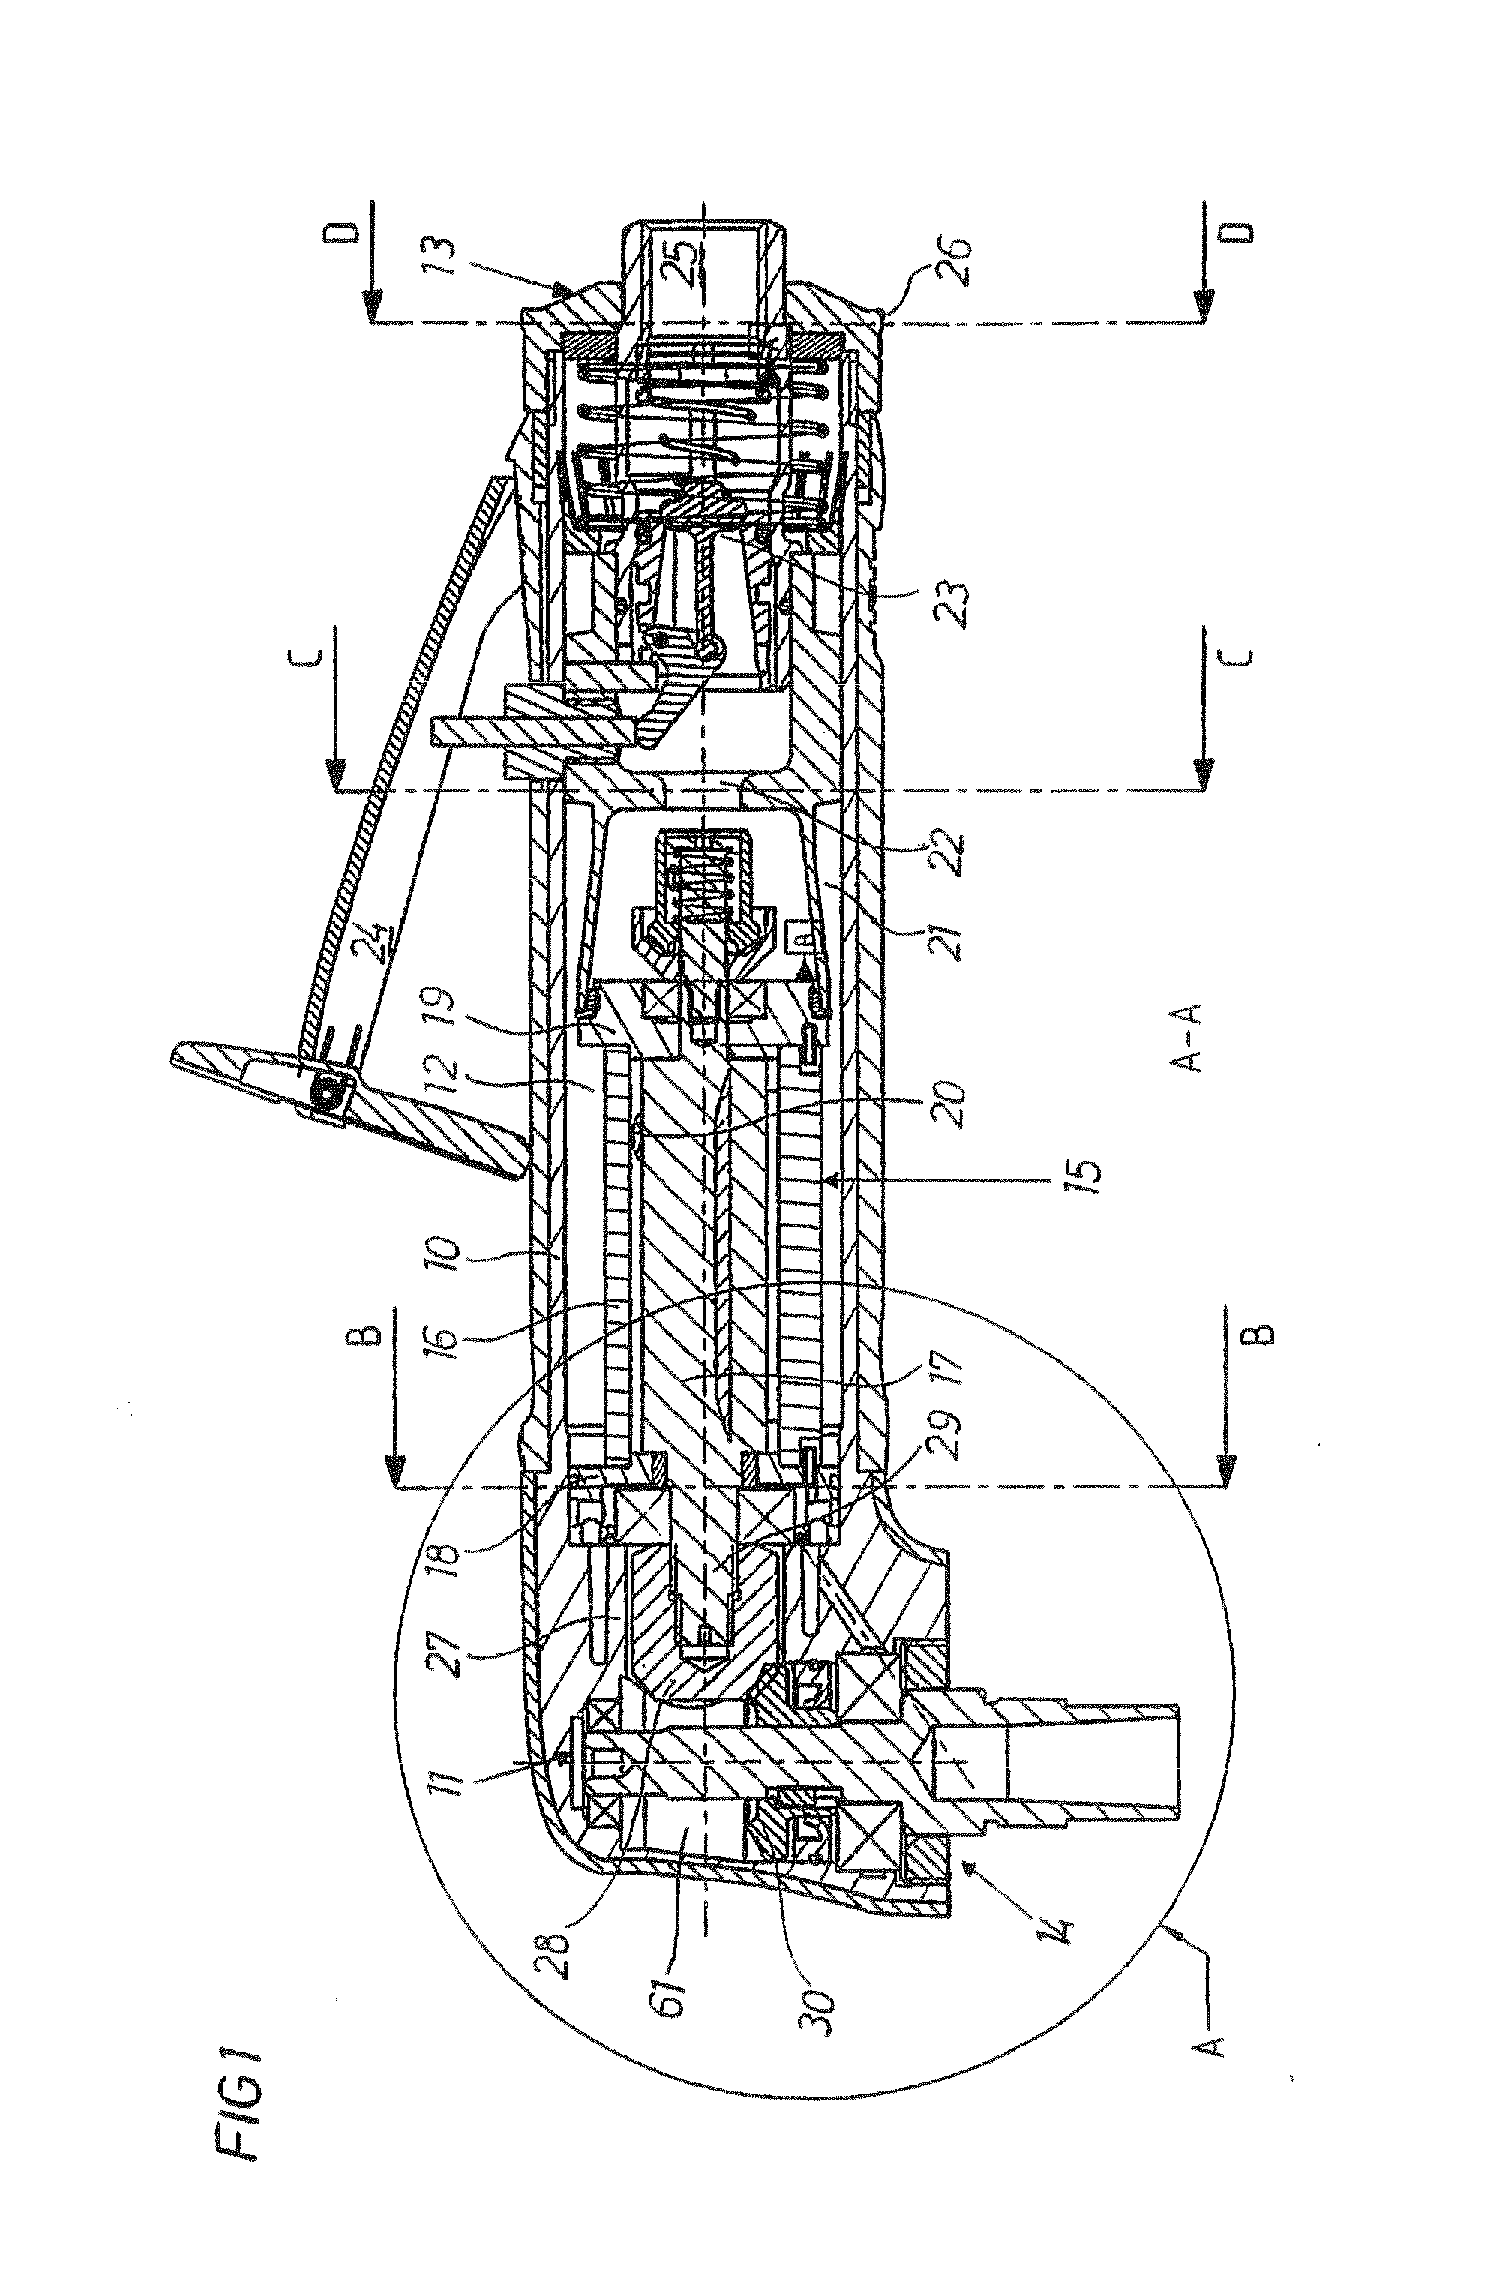 Pneumatic power tool with air cooling system